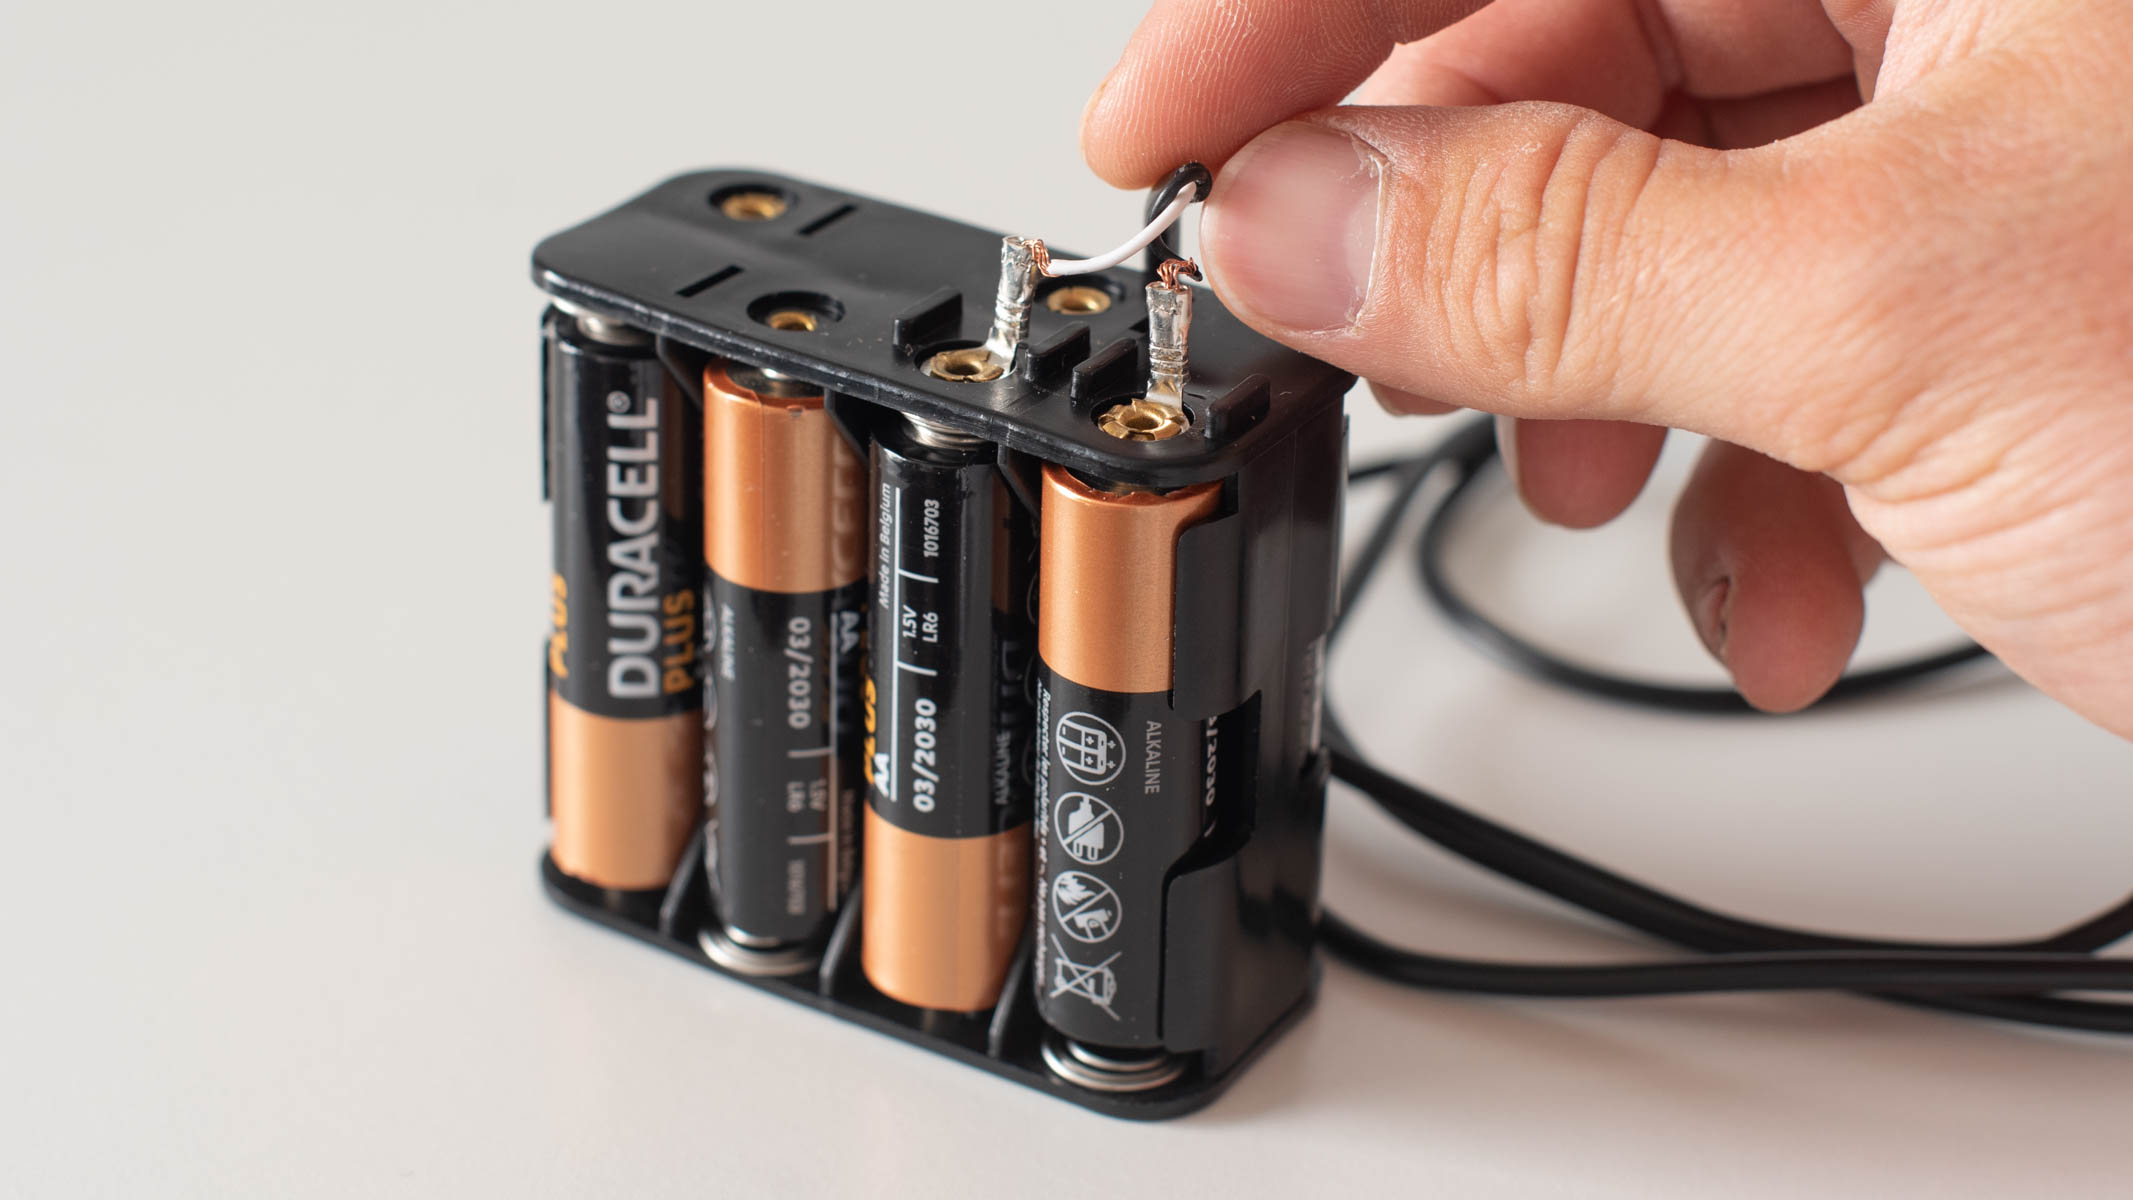 The Celestron Astro Fi 102, close up of the battery pack which holds 8 AA batteries